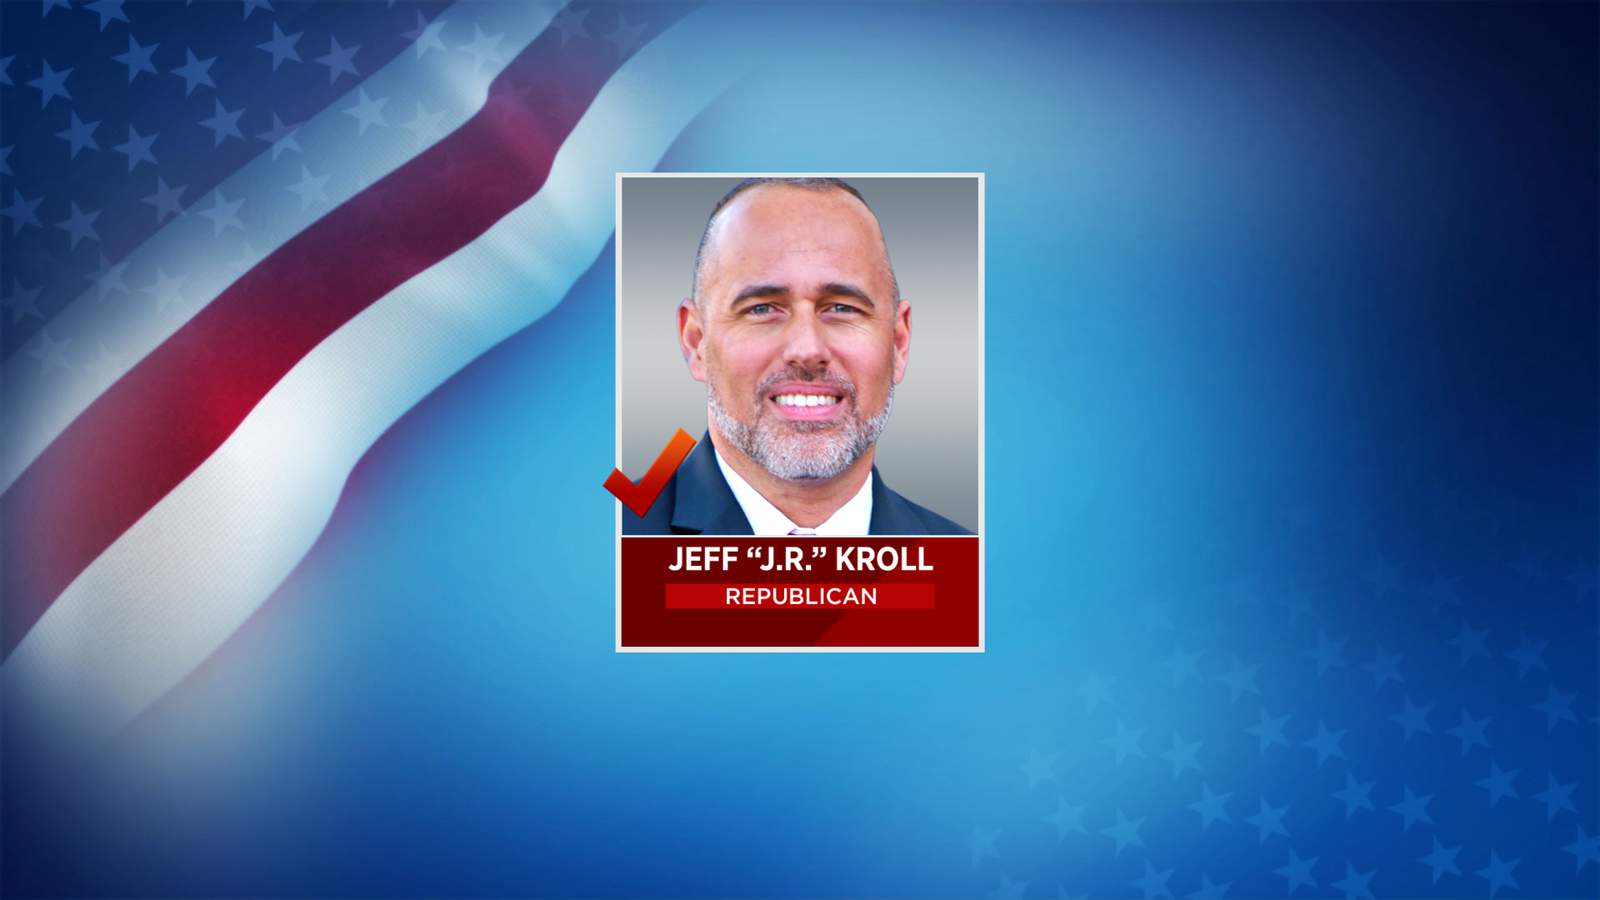 J.R. Kroll to replace Joel Greenberg as Seminole County tax collector